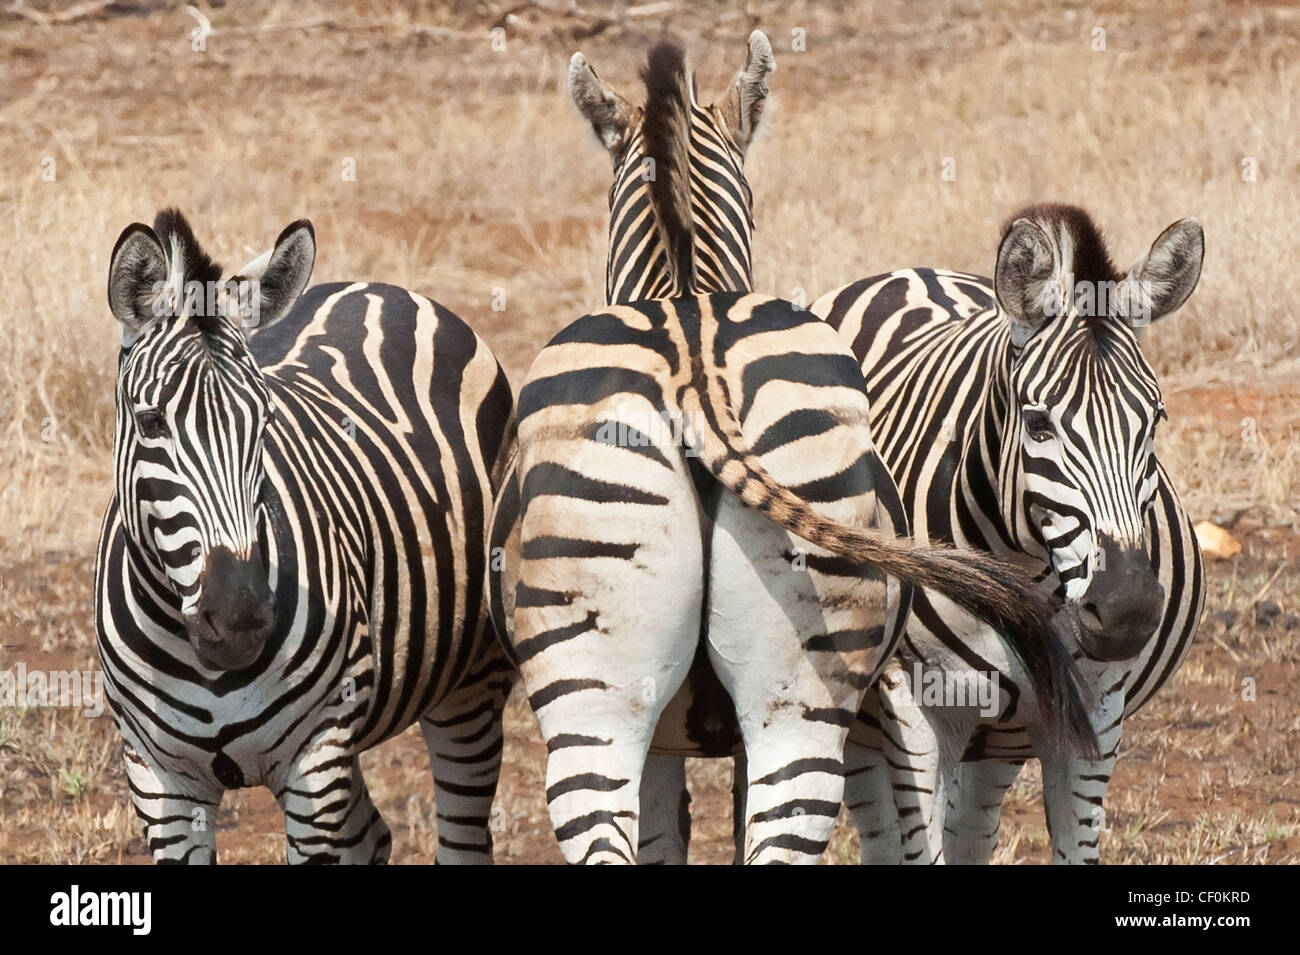 Three Zebras with different views of life Stock Photo